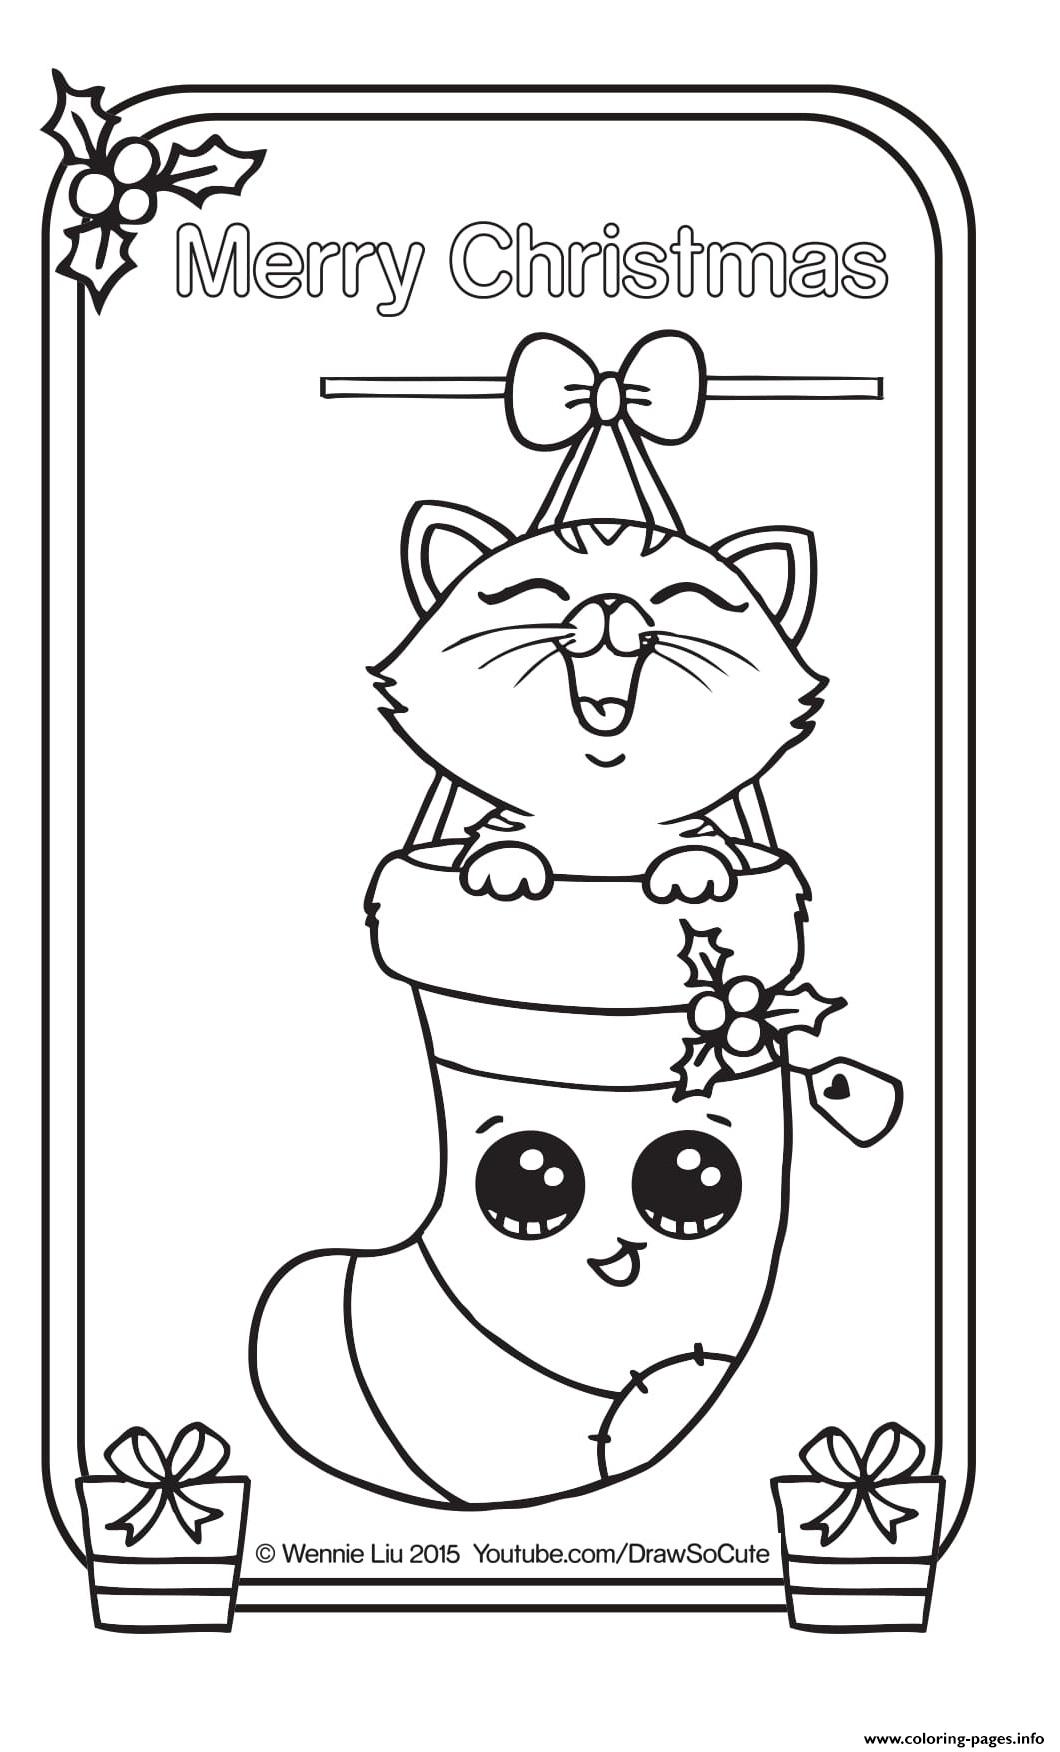 Christmas Card Kitten Draw So Cute coloring